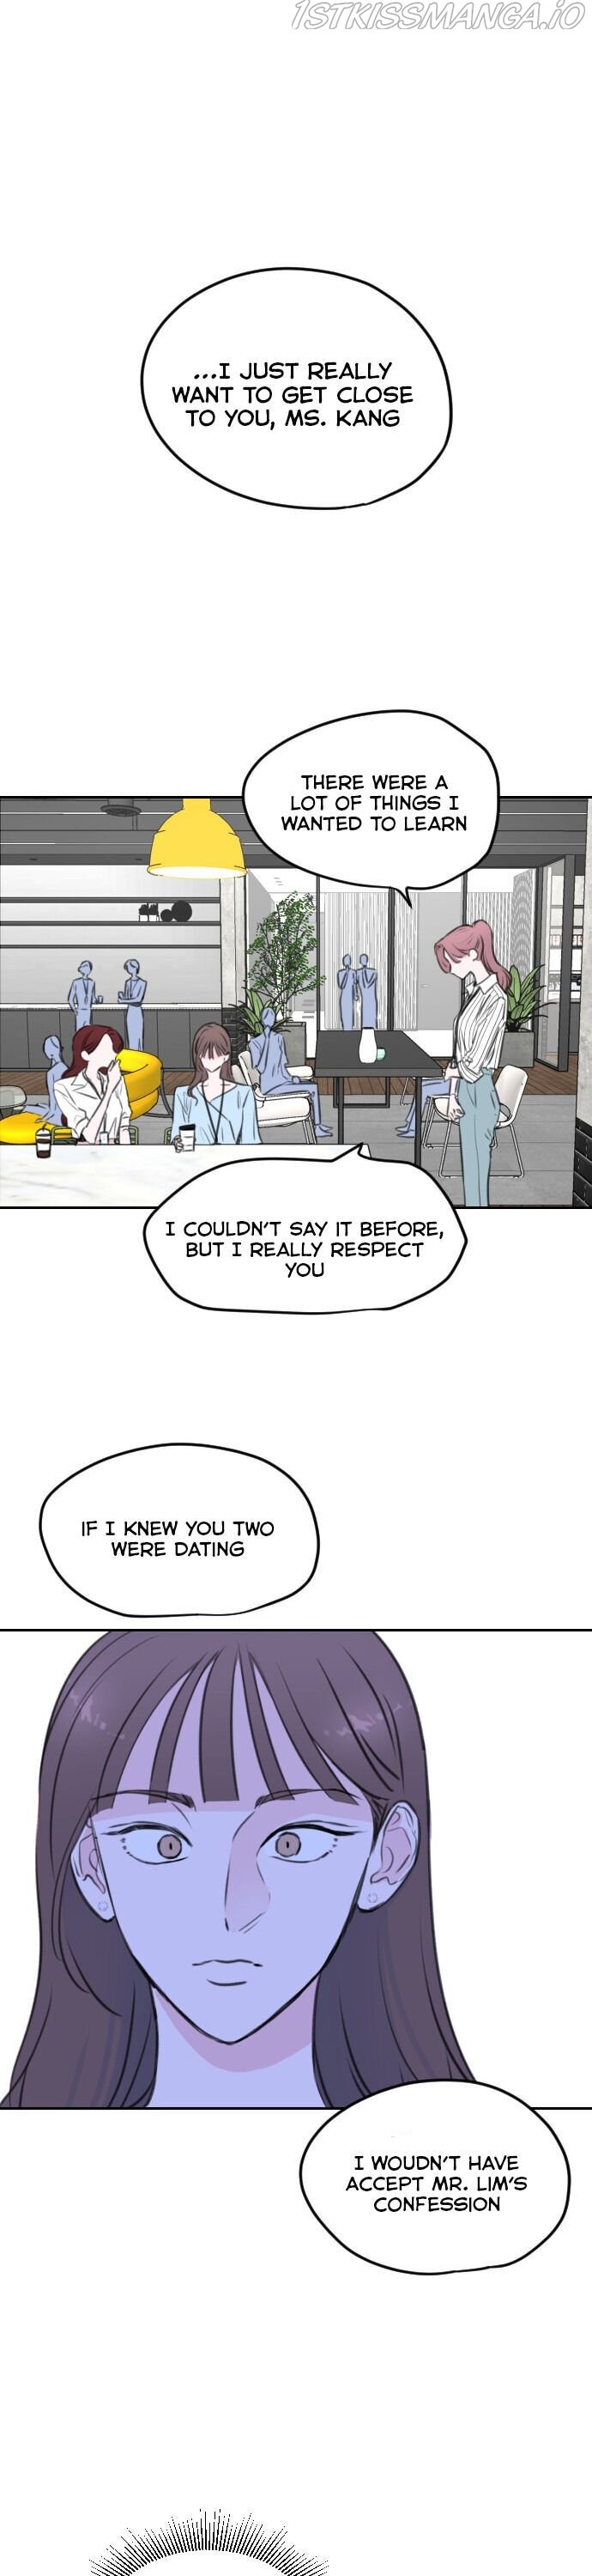 Office Marriage, After a Breakup chapter 4